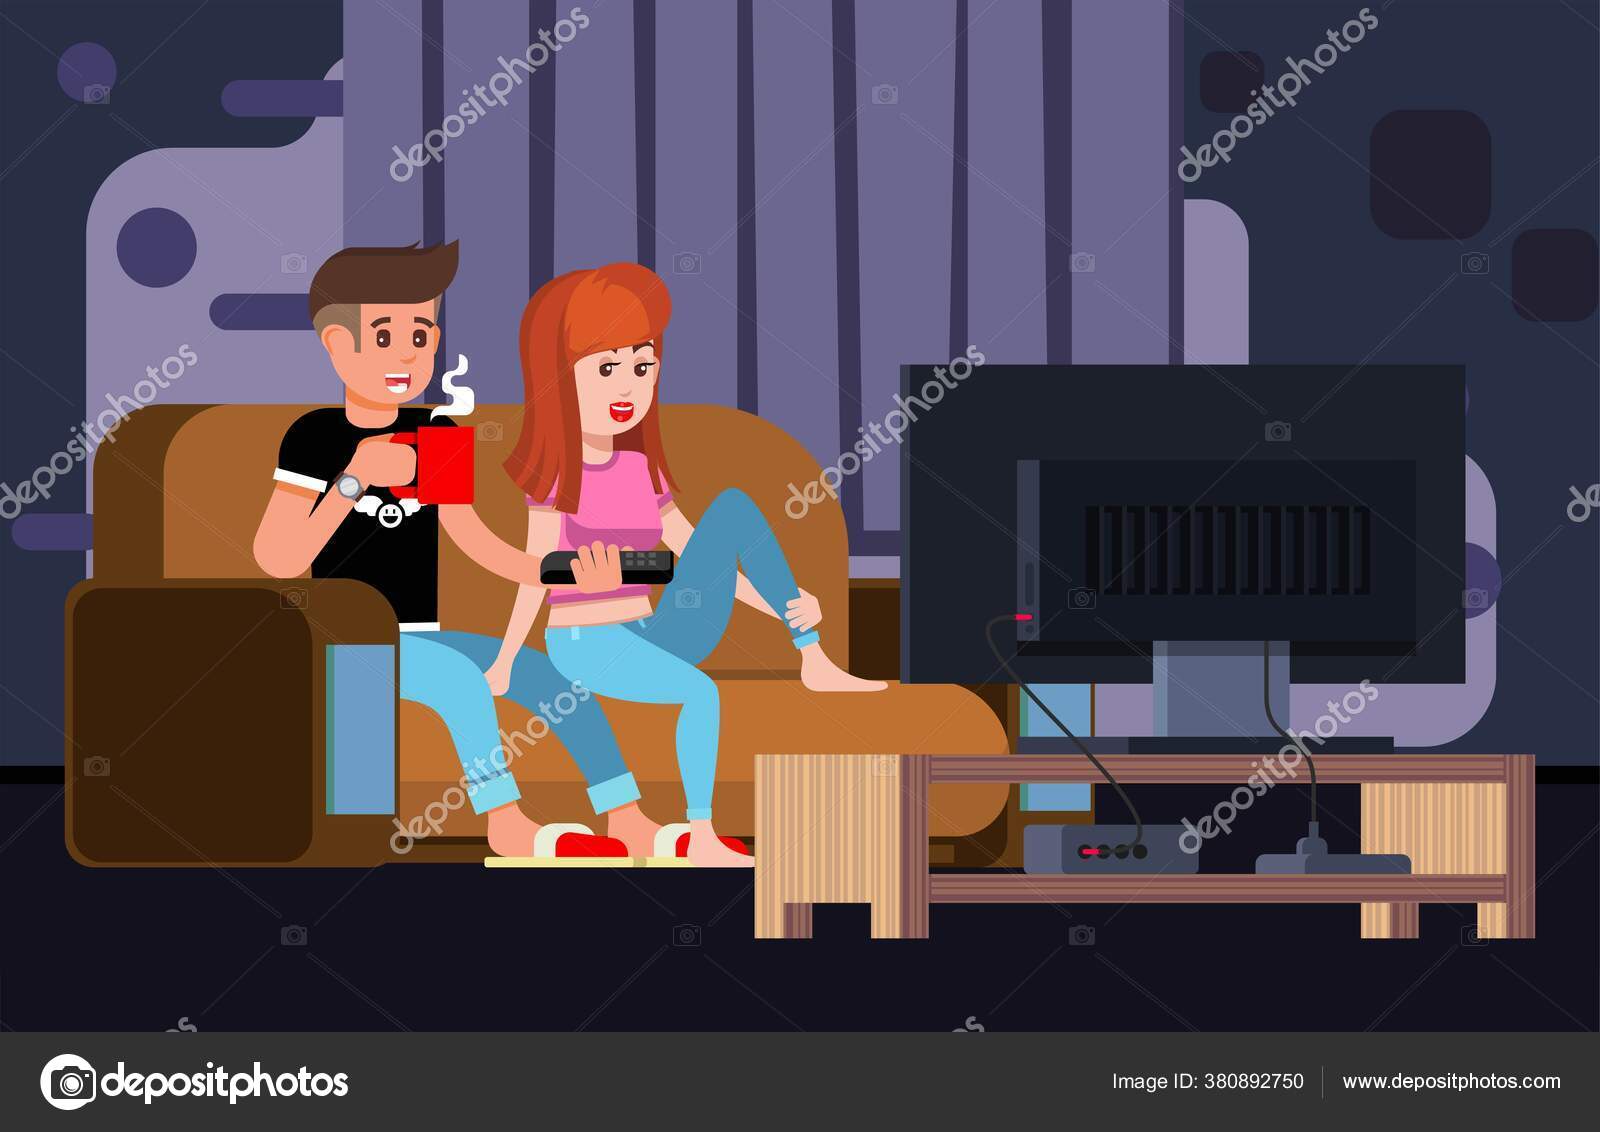 The Animated Movie Home Porn - Couple Watching Young People Relaxing Home Use Remote Control Movie Stock  Illustration by Â©Jordison #380892750